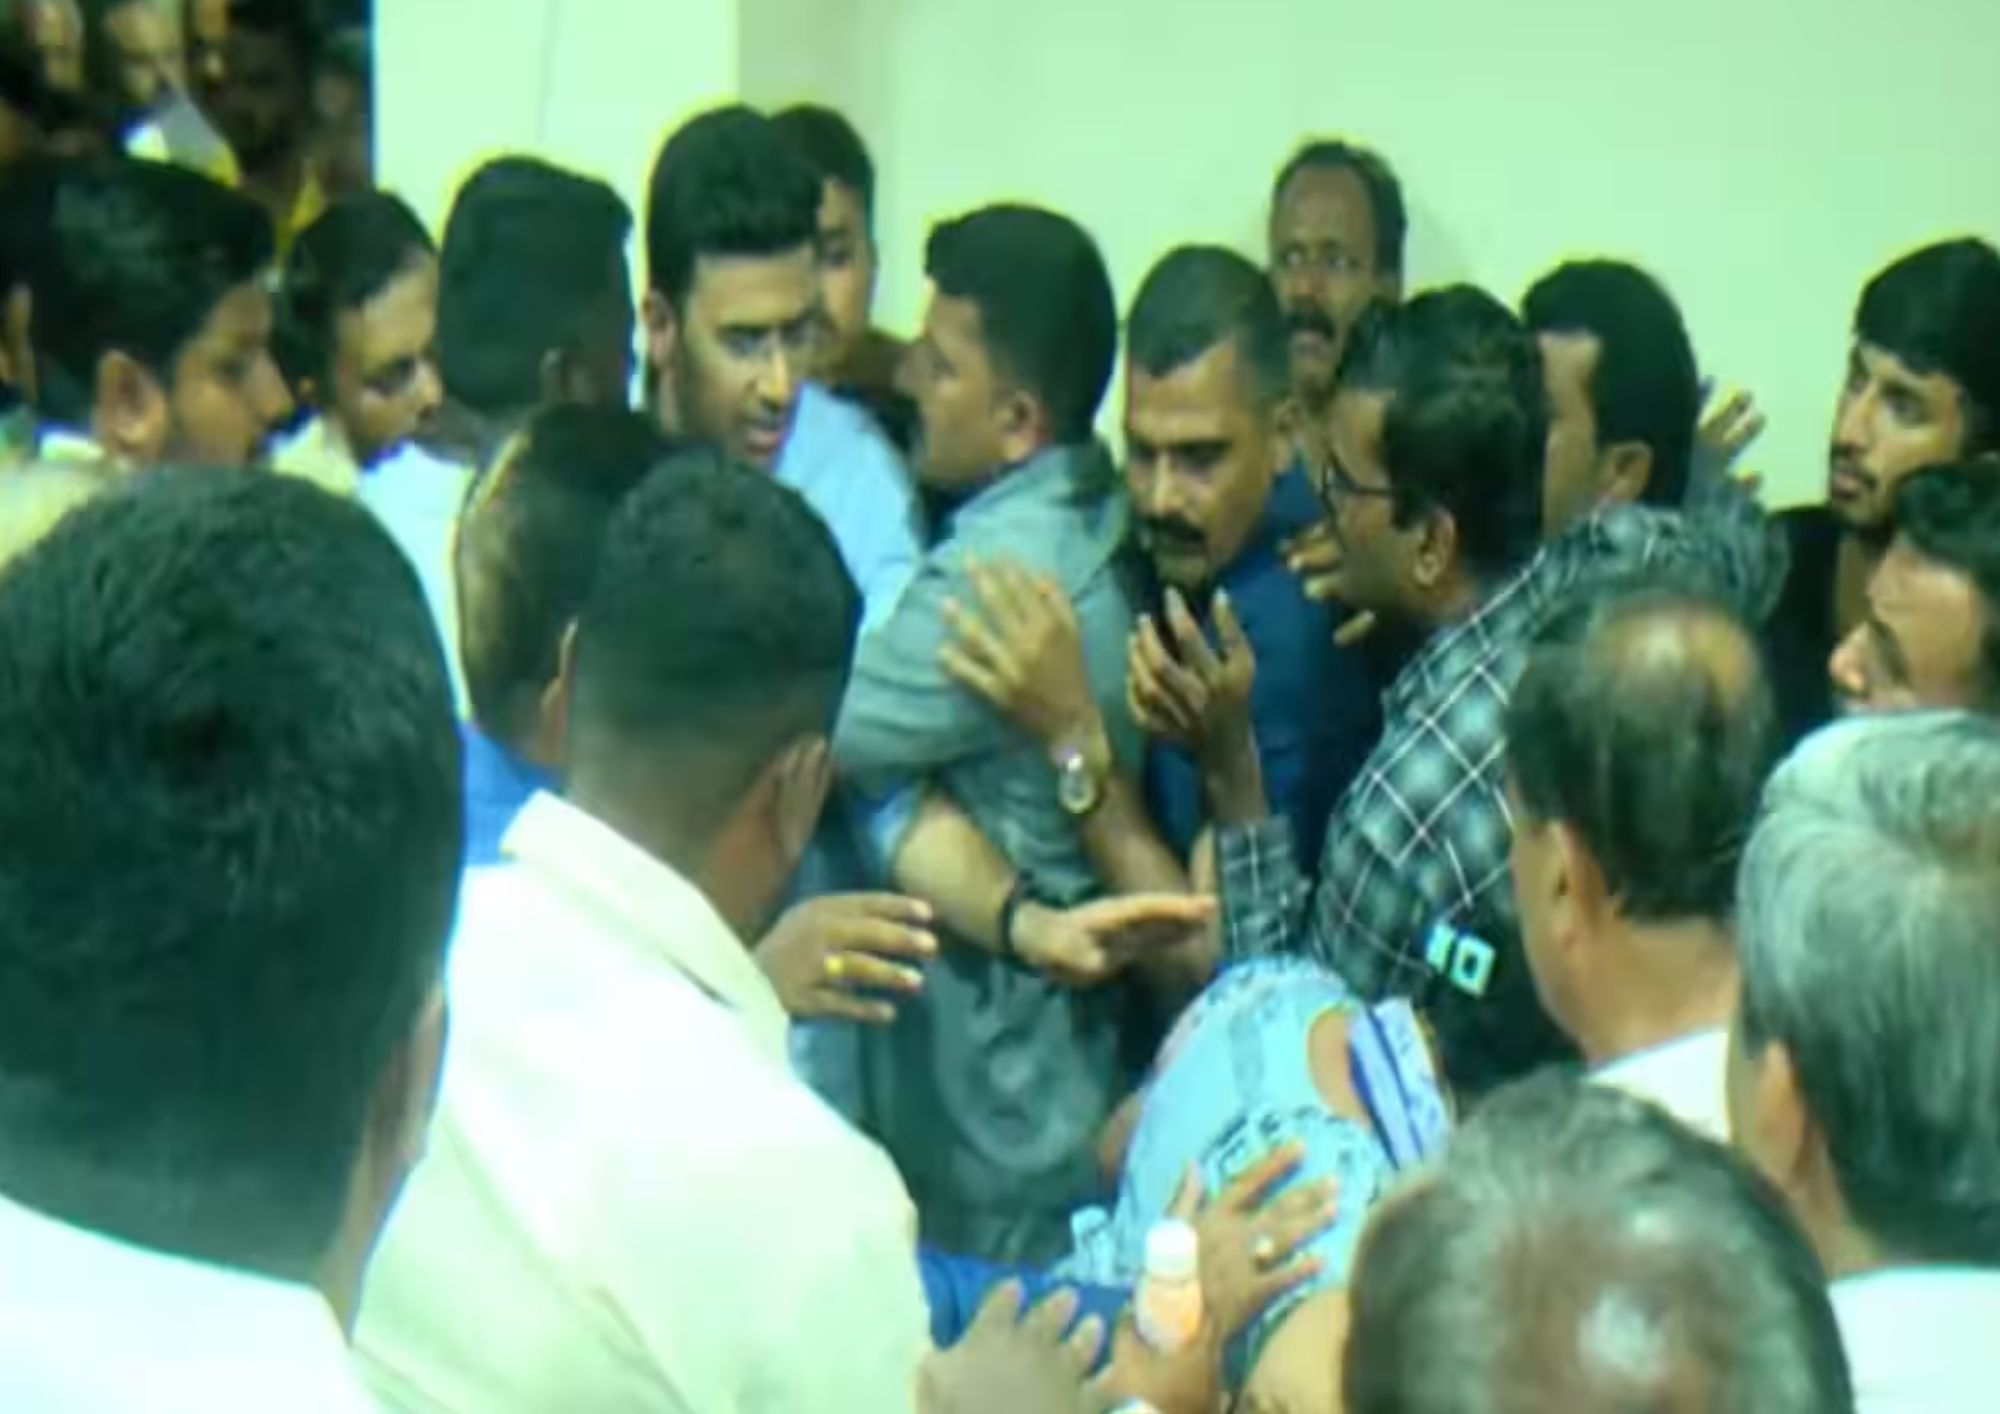 Scam victims surrounded Tejashwi Surya, he somehow managed to escape amid the scuffle